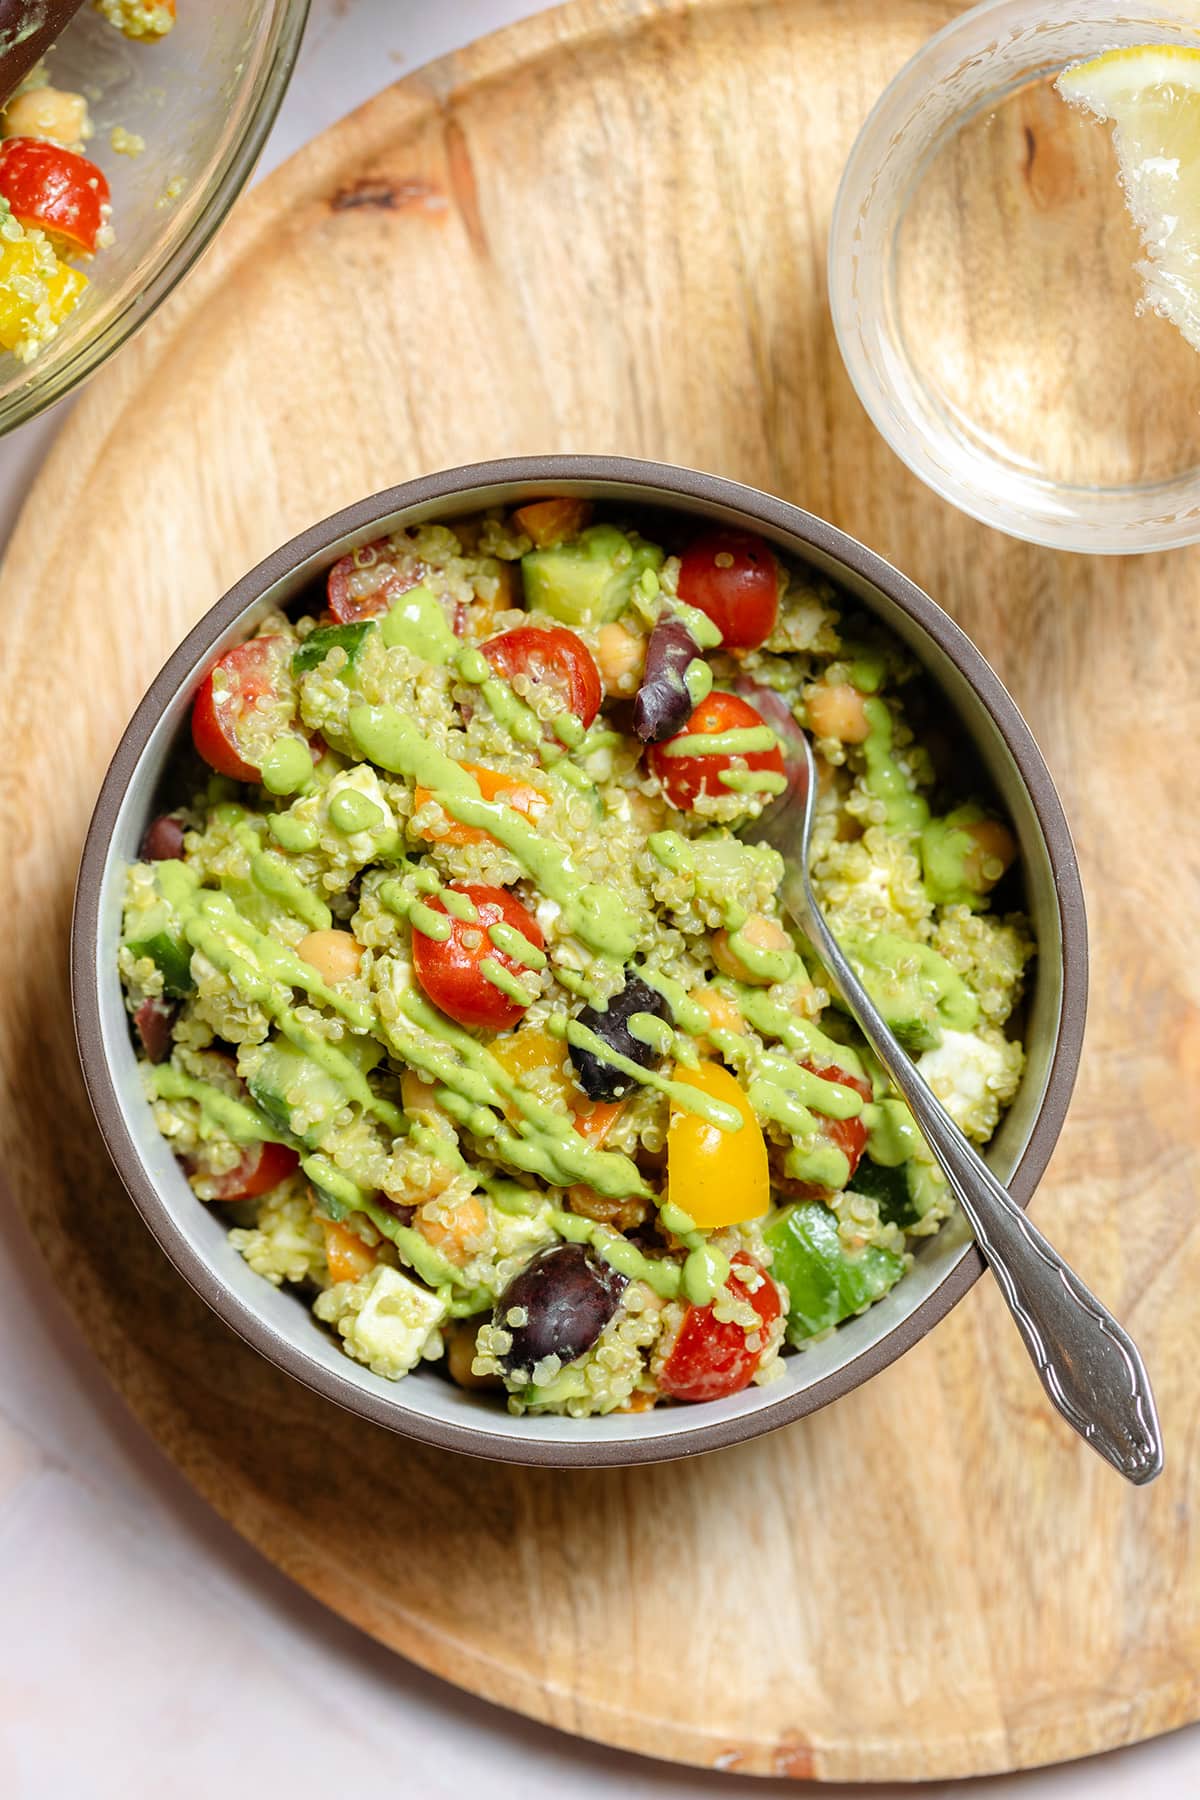 Colorful vegetable quinoa salad with green avocado dressing in a ceramic bowl on a wooden serving plate.